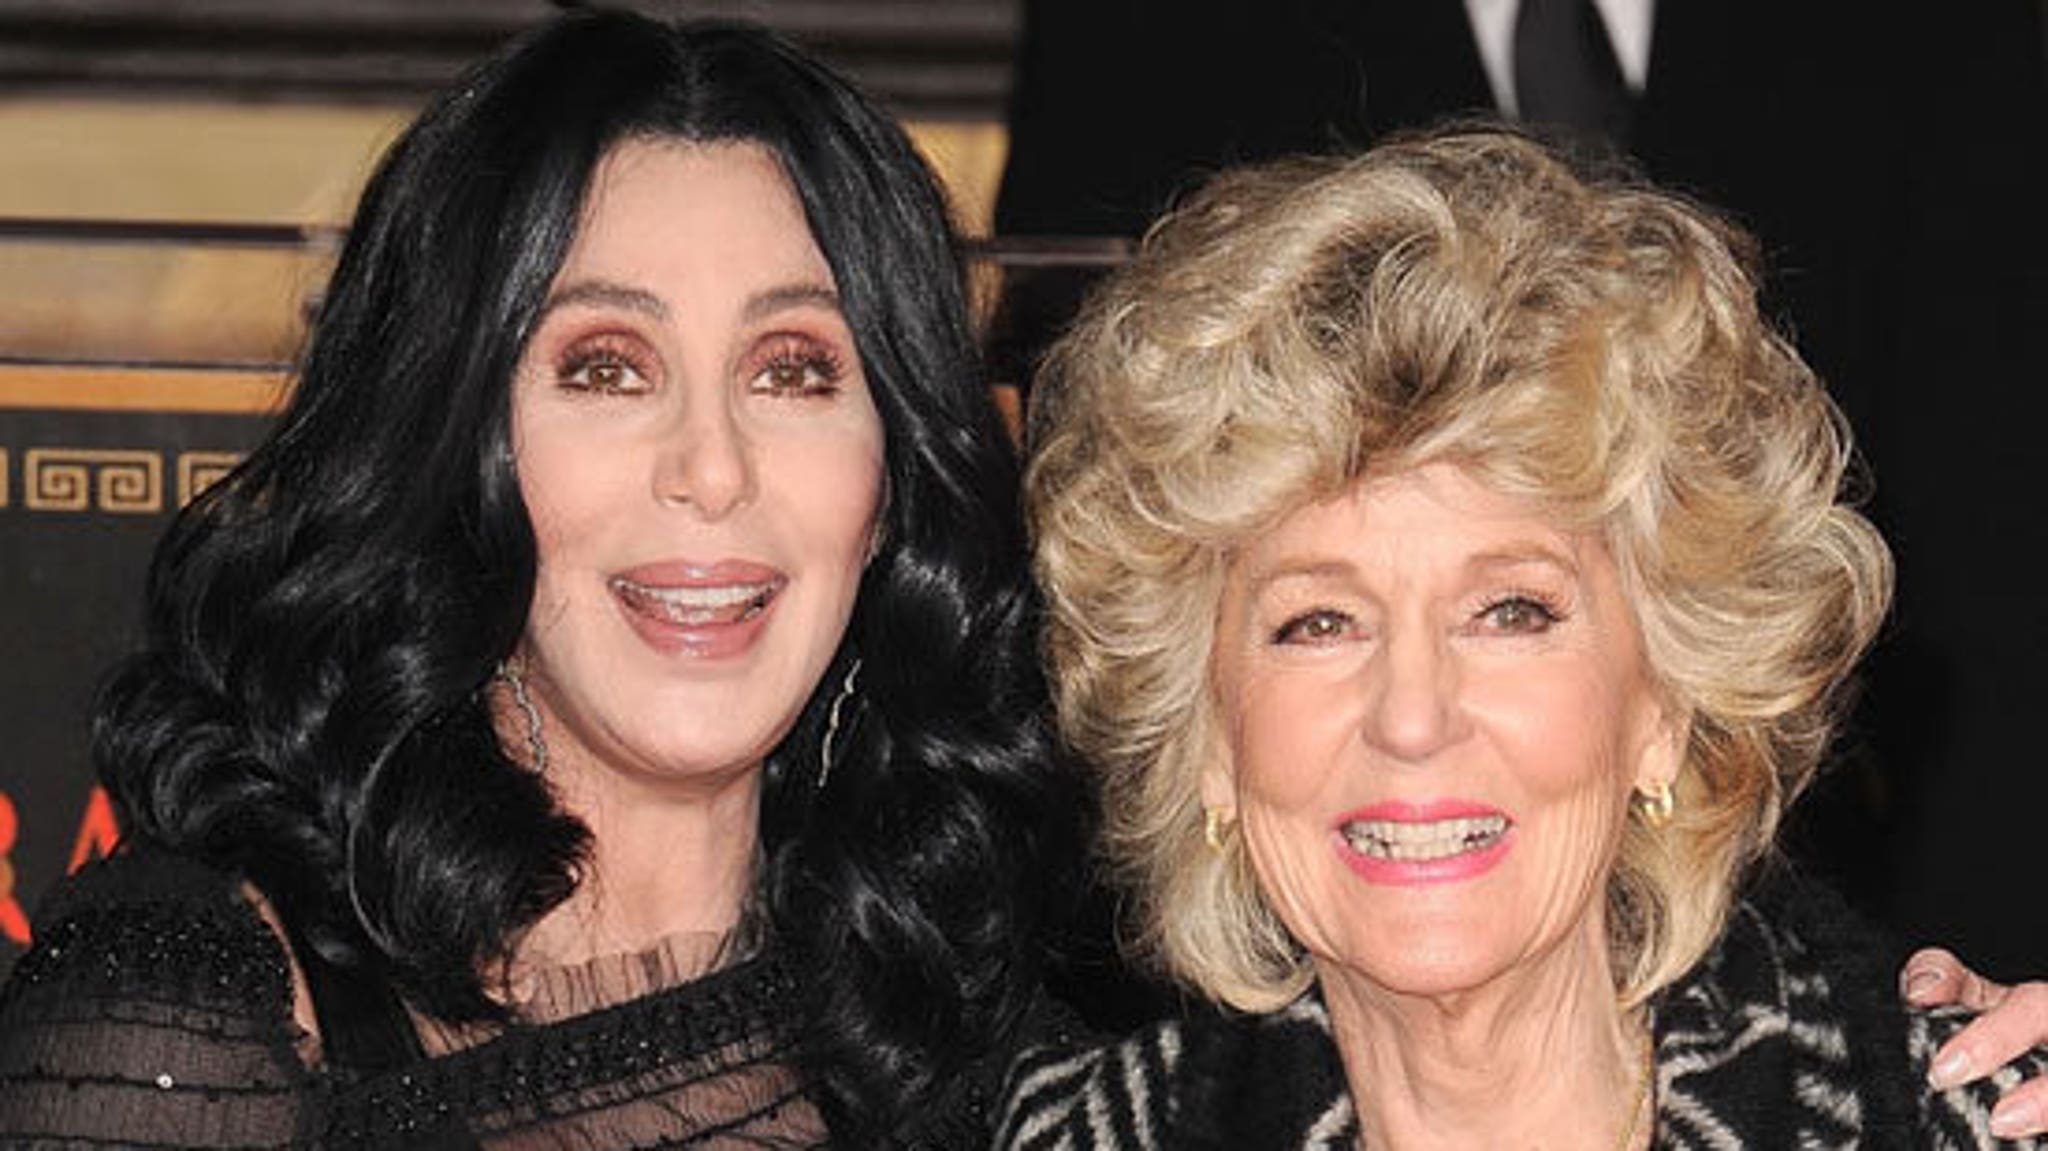 Cher Vs Her Mom Whod You Rather